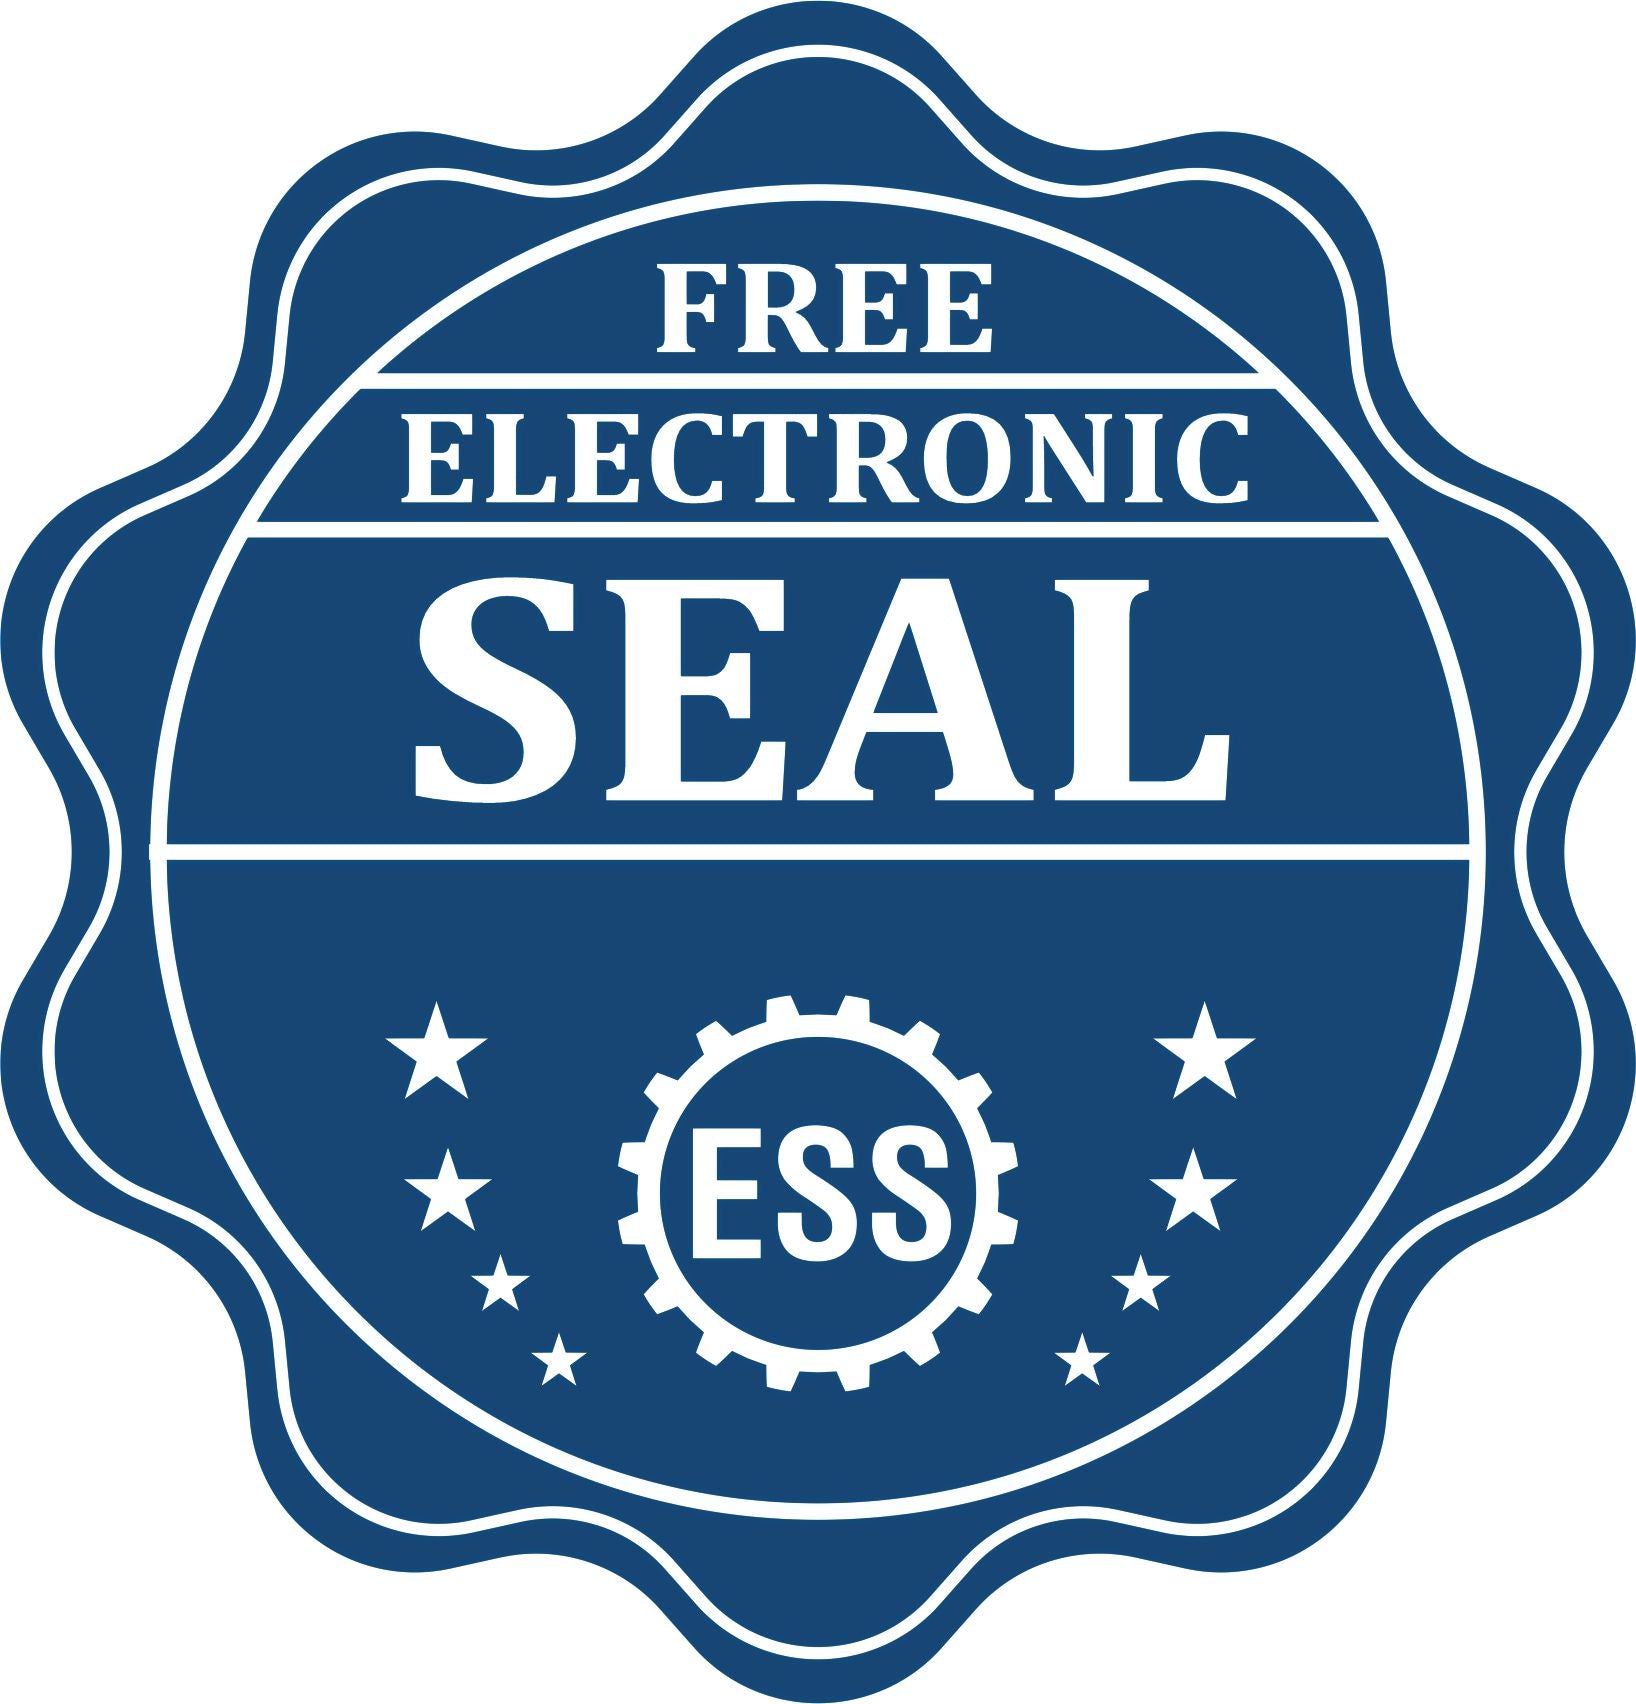 A badge showing a free electronic seal for the State of Mississippi Extended Long Reach Geologist Seal with stars and the ESS gear on the emblem.